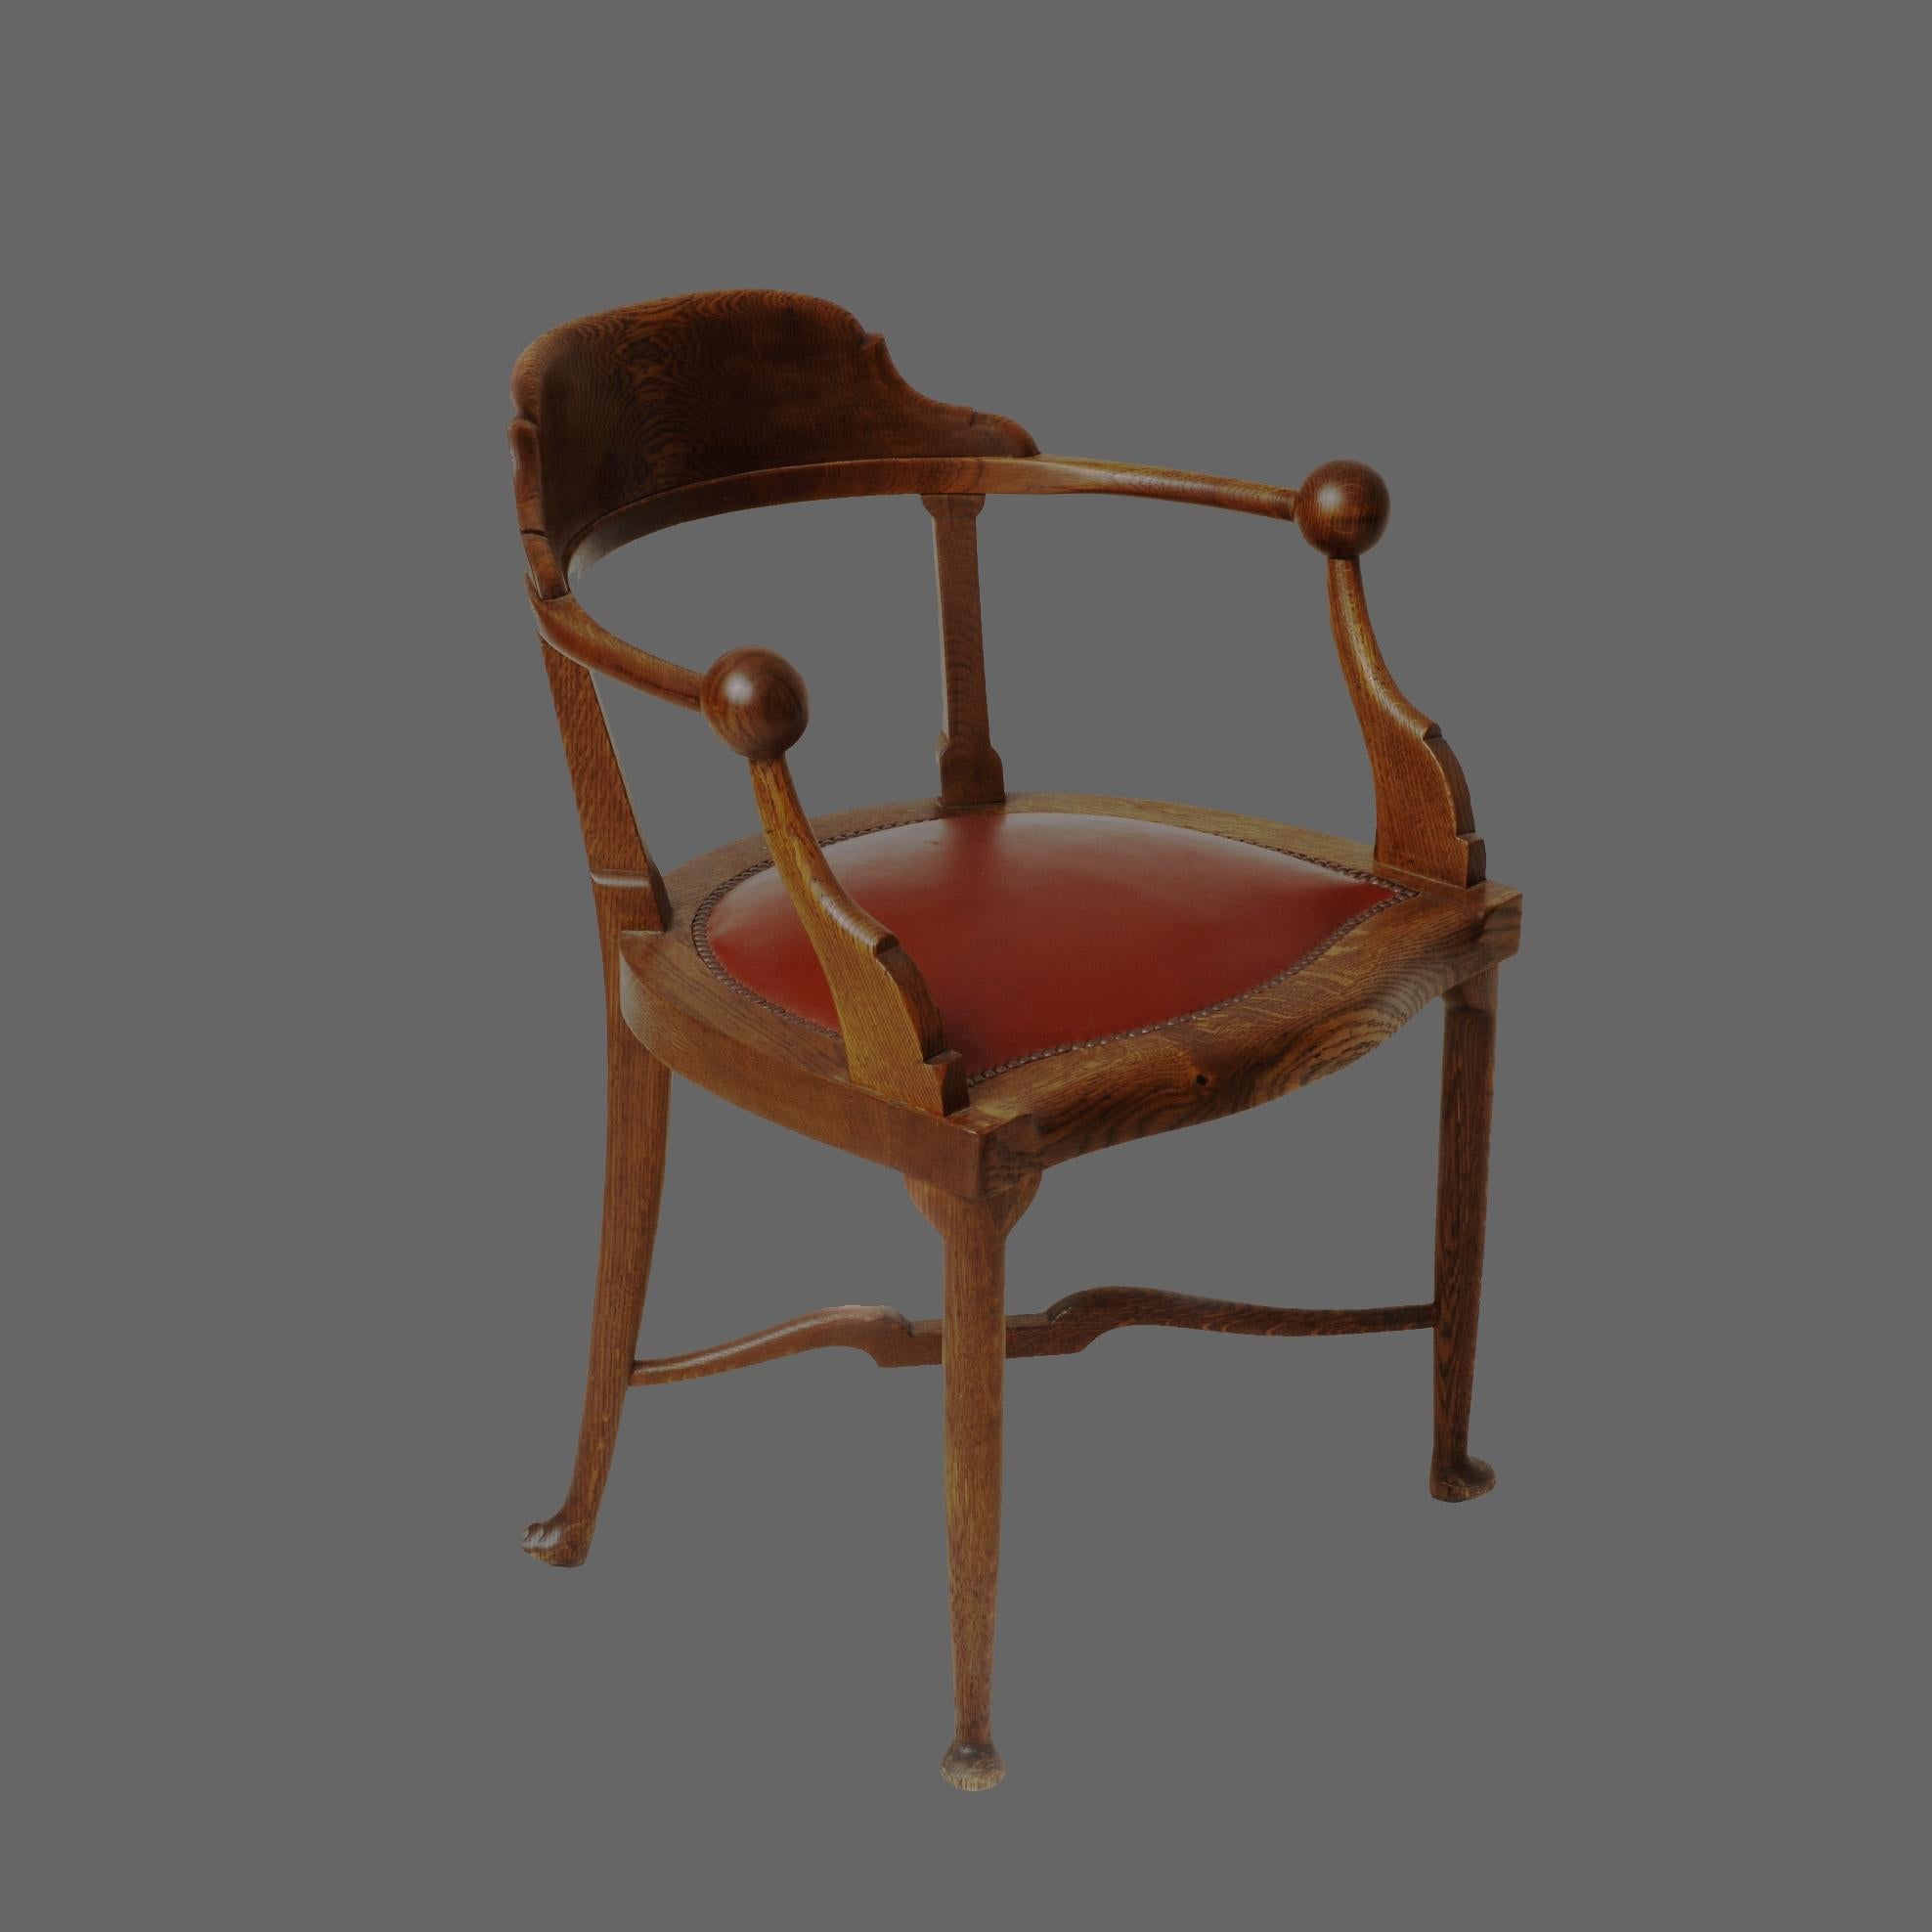 The chair has been manufactured by Lingel Karoly and sons co. in year 1915.
Very strong construction and quality materials were used in production of this armchair.
The chair has been restored 7 years ago and was not in use since.
One of most iconic